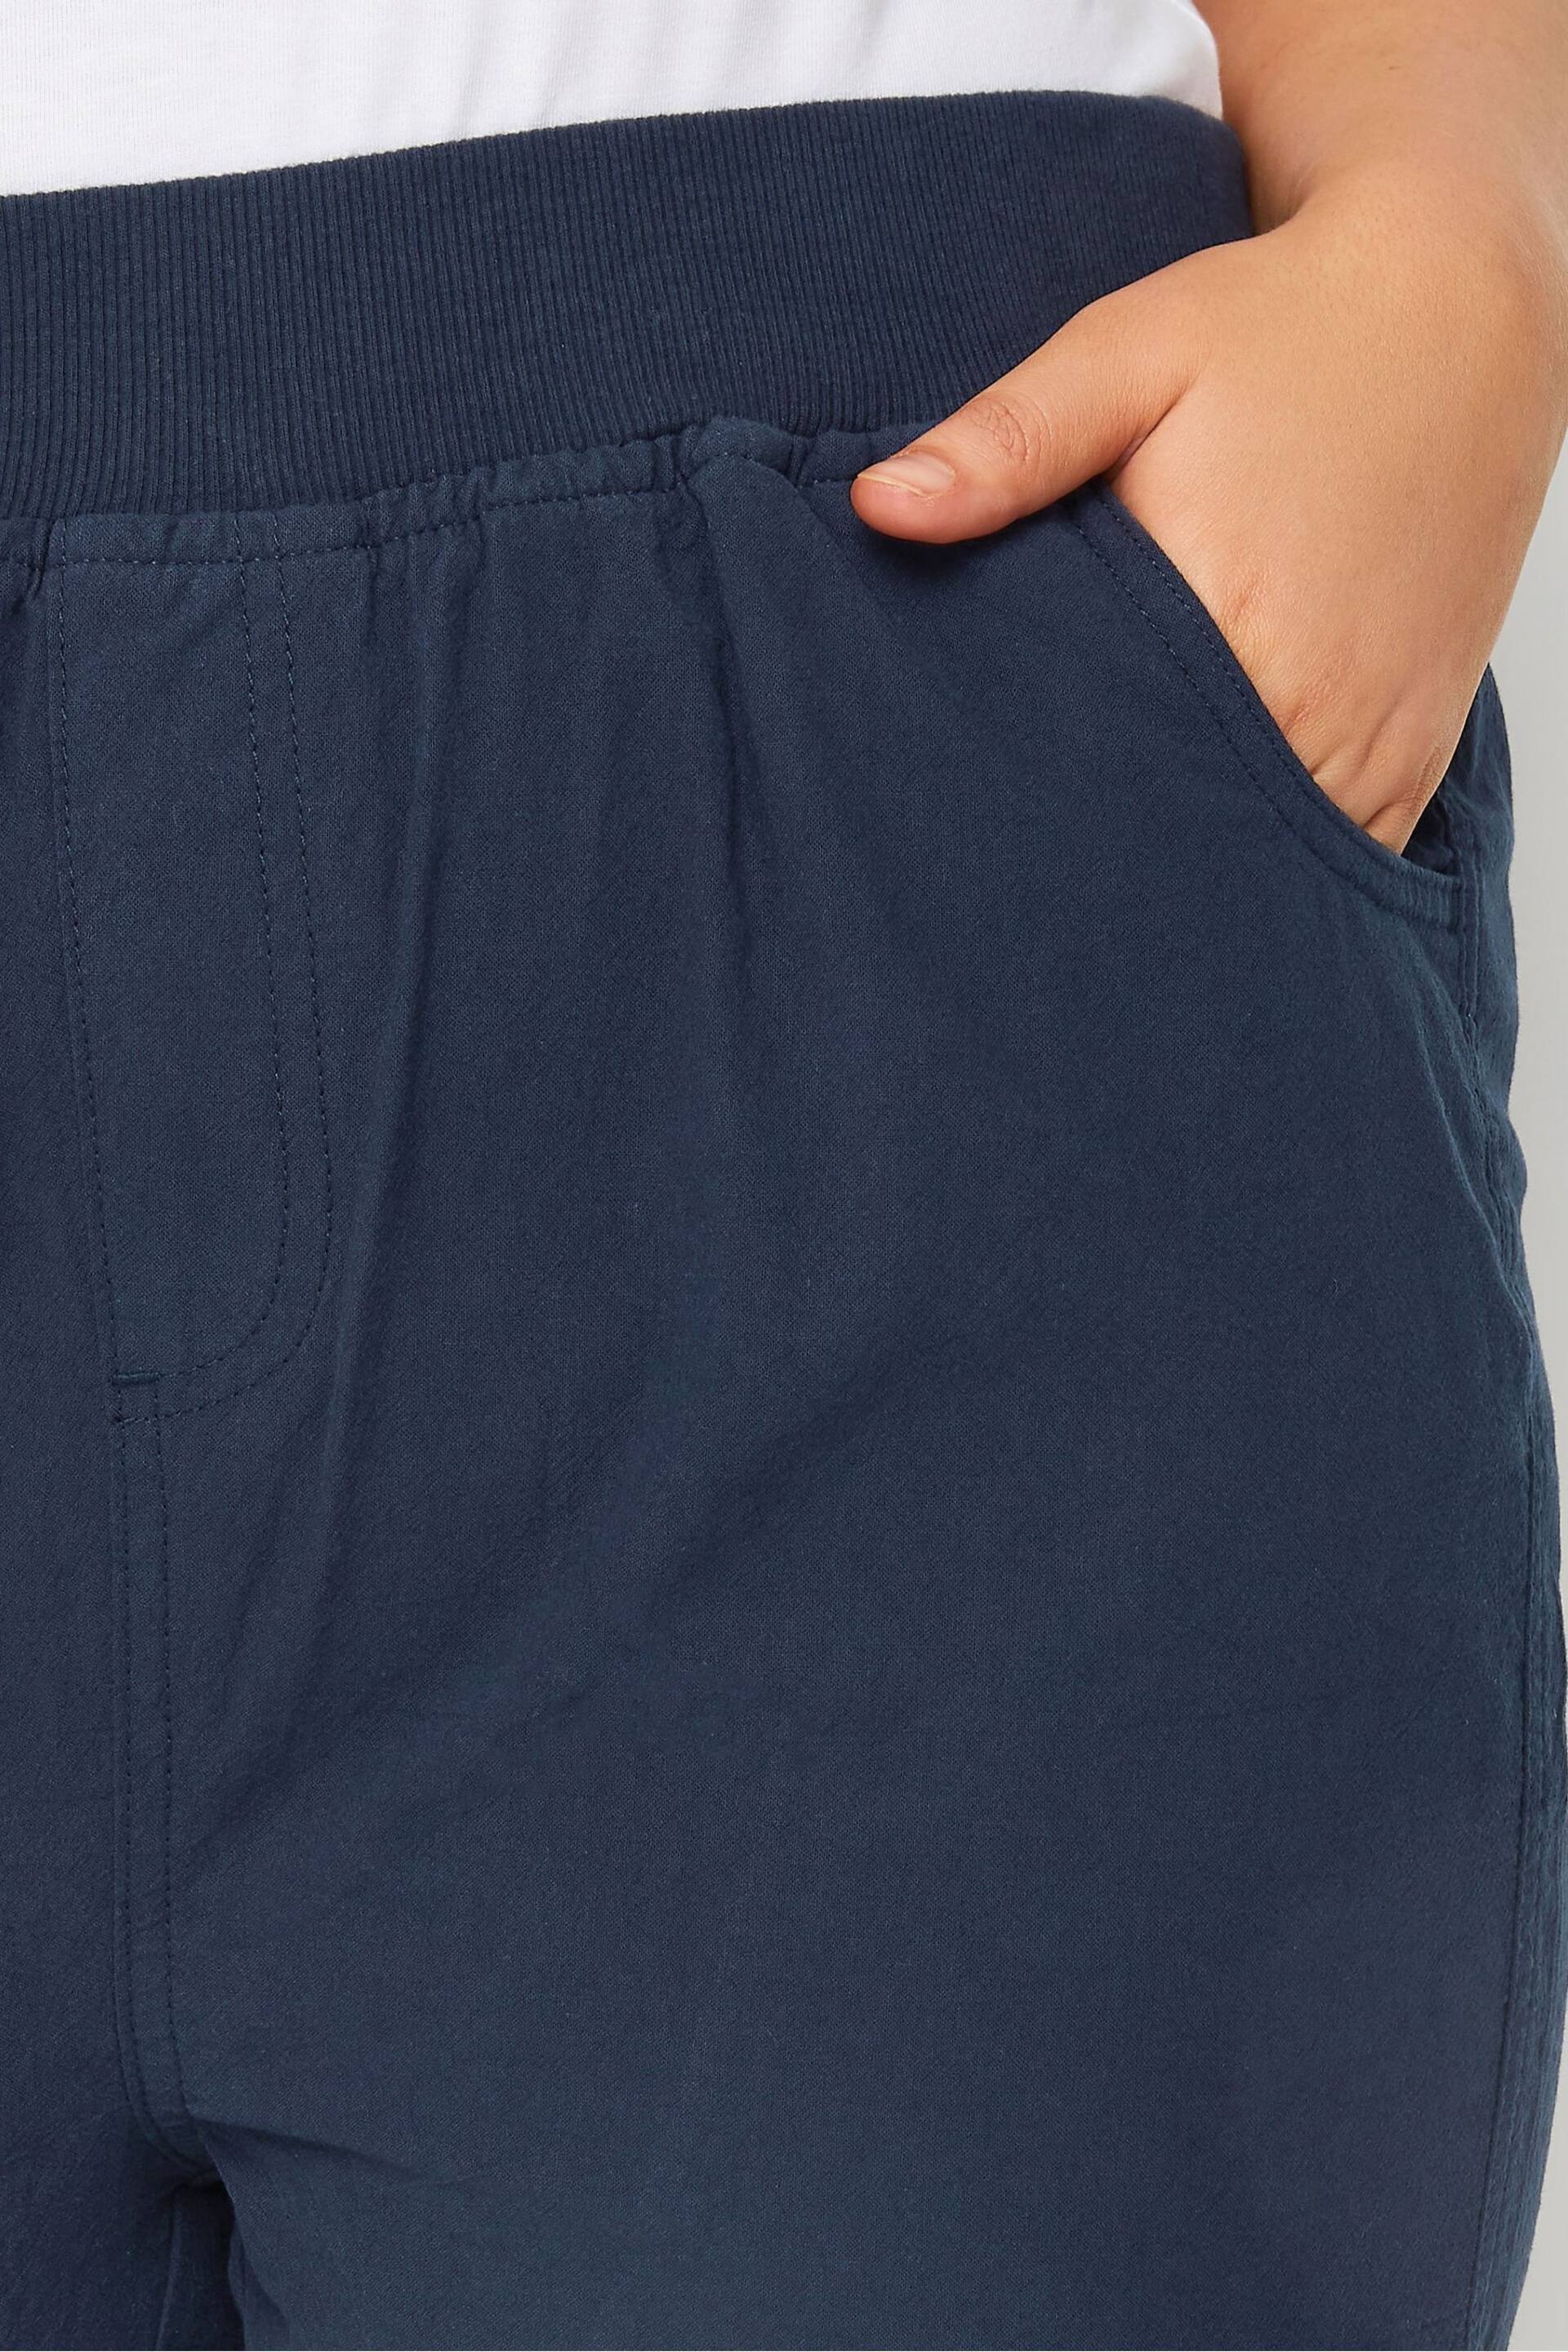 Yours Curve Blue Cool Cotton Shorts With Jersey Waist Band - Image 3 of 5